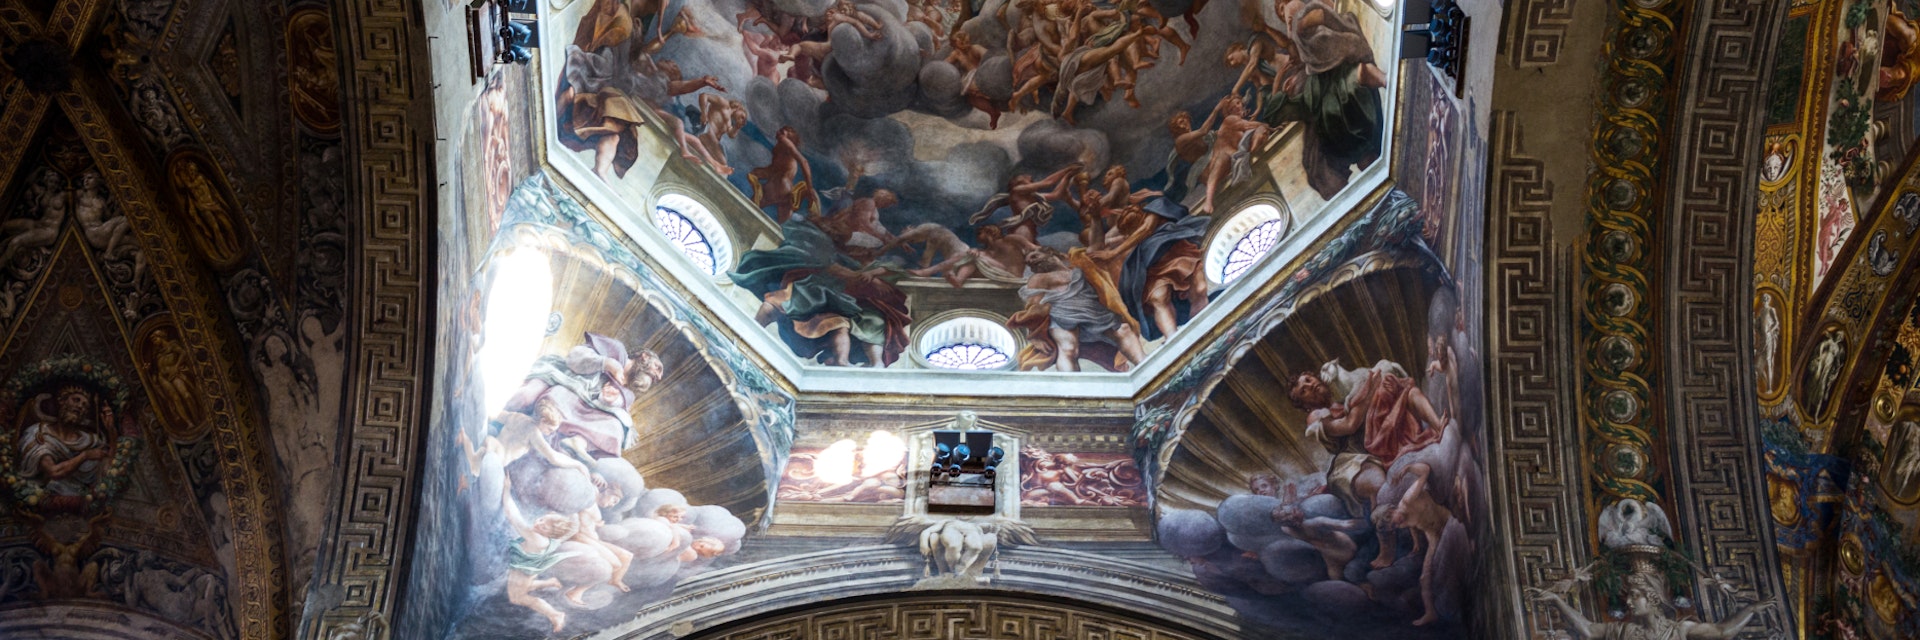 Parma, the Basilica Cathedra inside, view of the dome with the fresco of the Assumption of the Virgin executed by Correggio